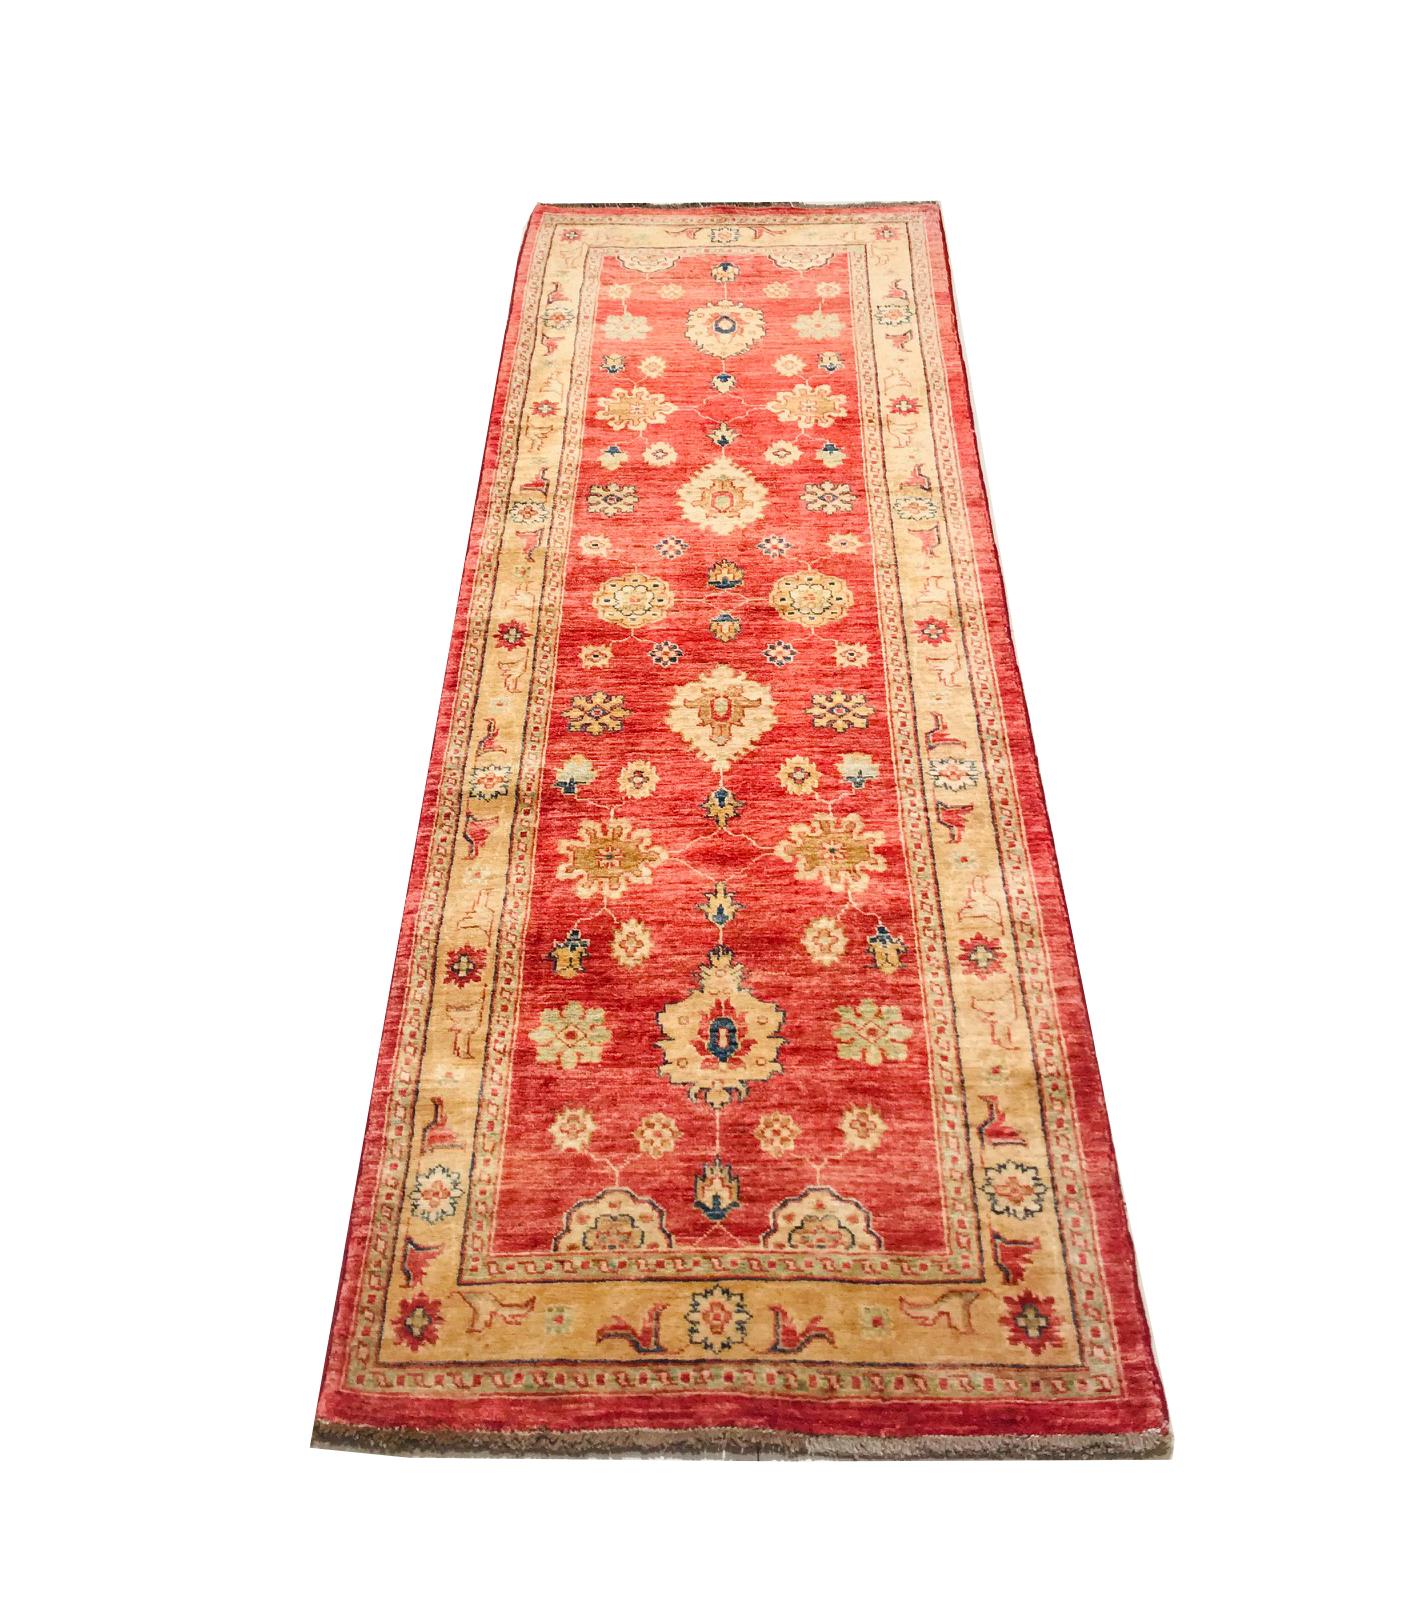 This Pakistan rug is from the 1980s, hand knotted with wool.
This set of carpet has drawings of flowers, a combination of soft colors such as red, yellow and beige that makes it a perfect piece to decorate a corner of our home.